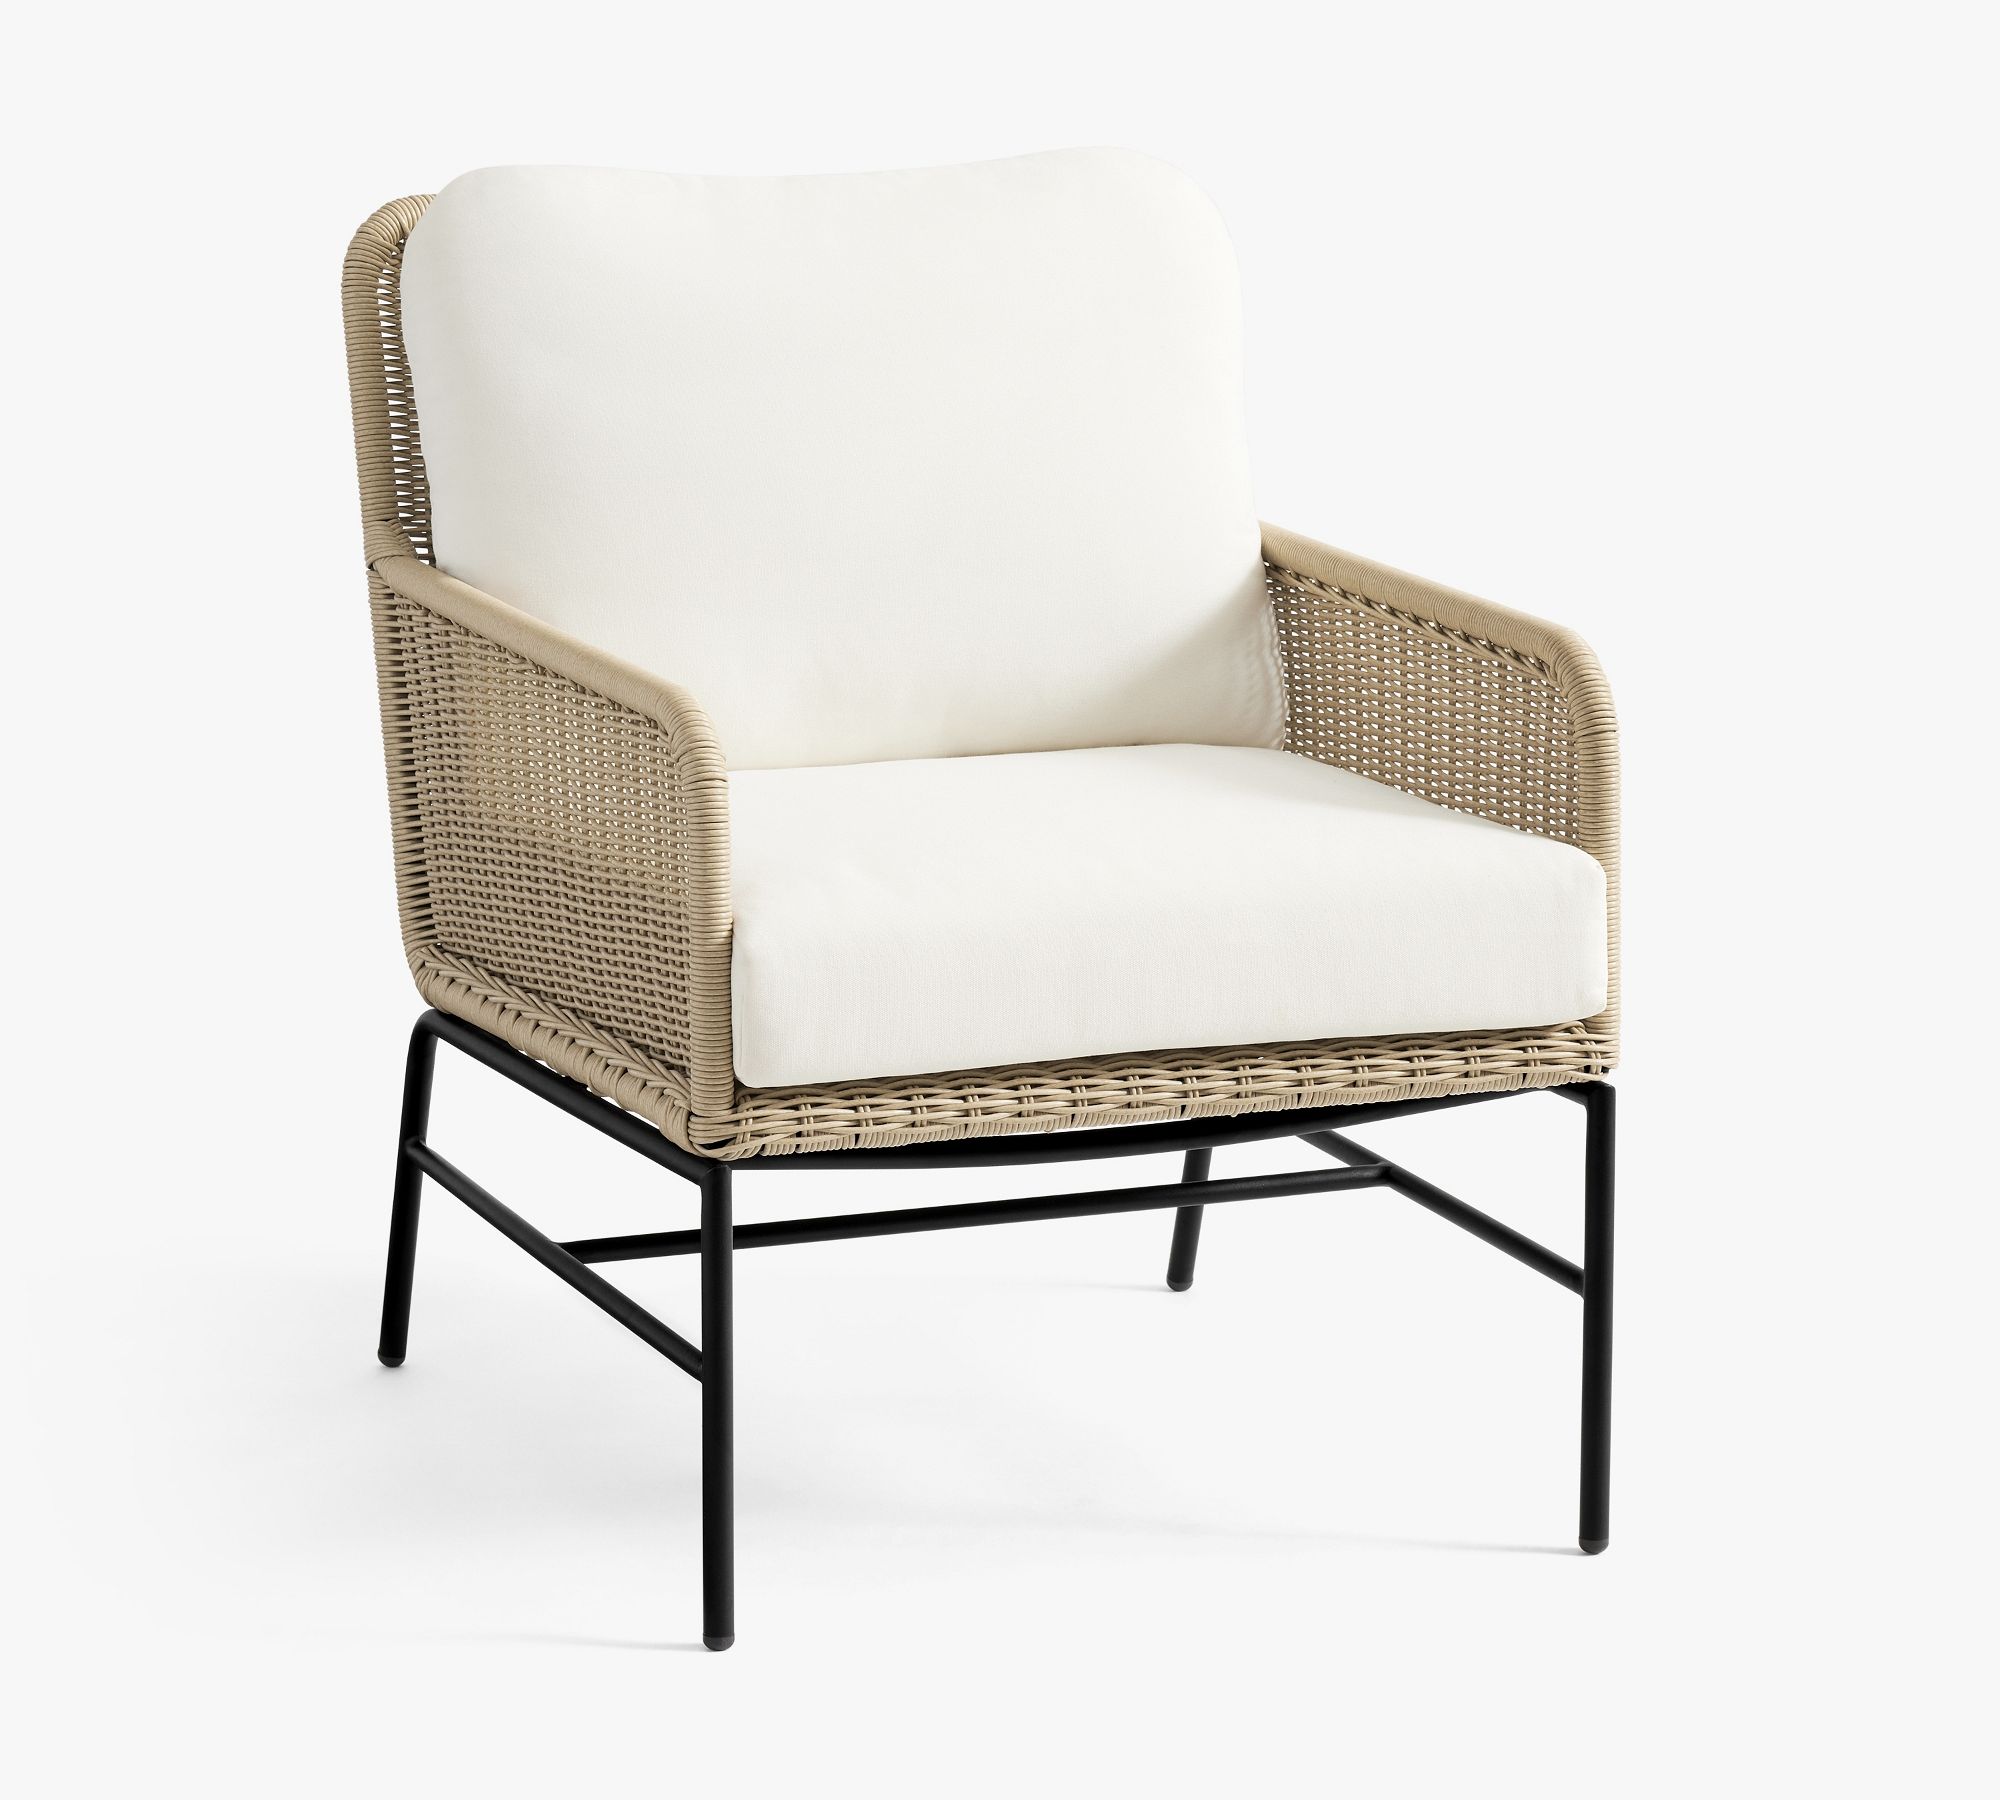 Tulum Outdoor Lounge Chair